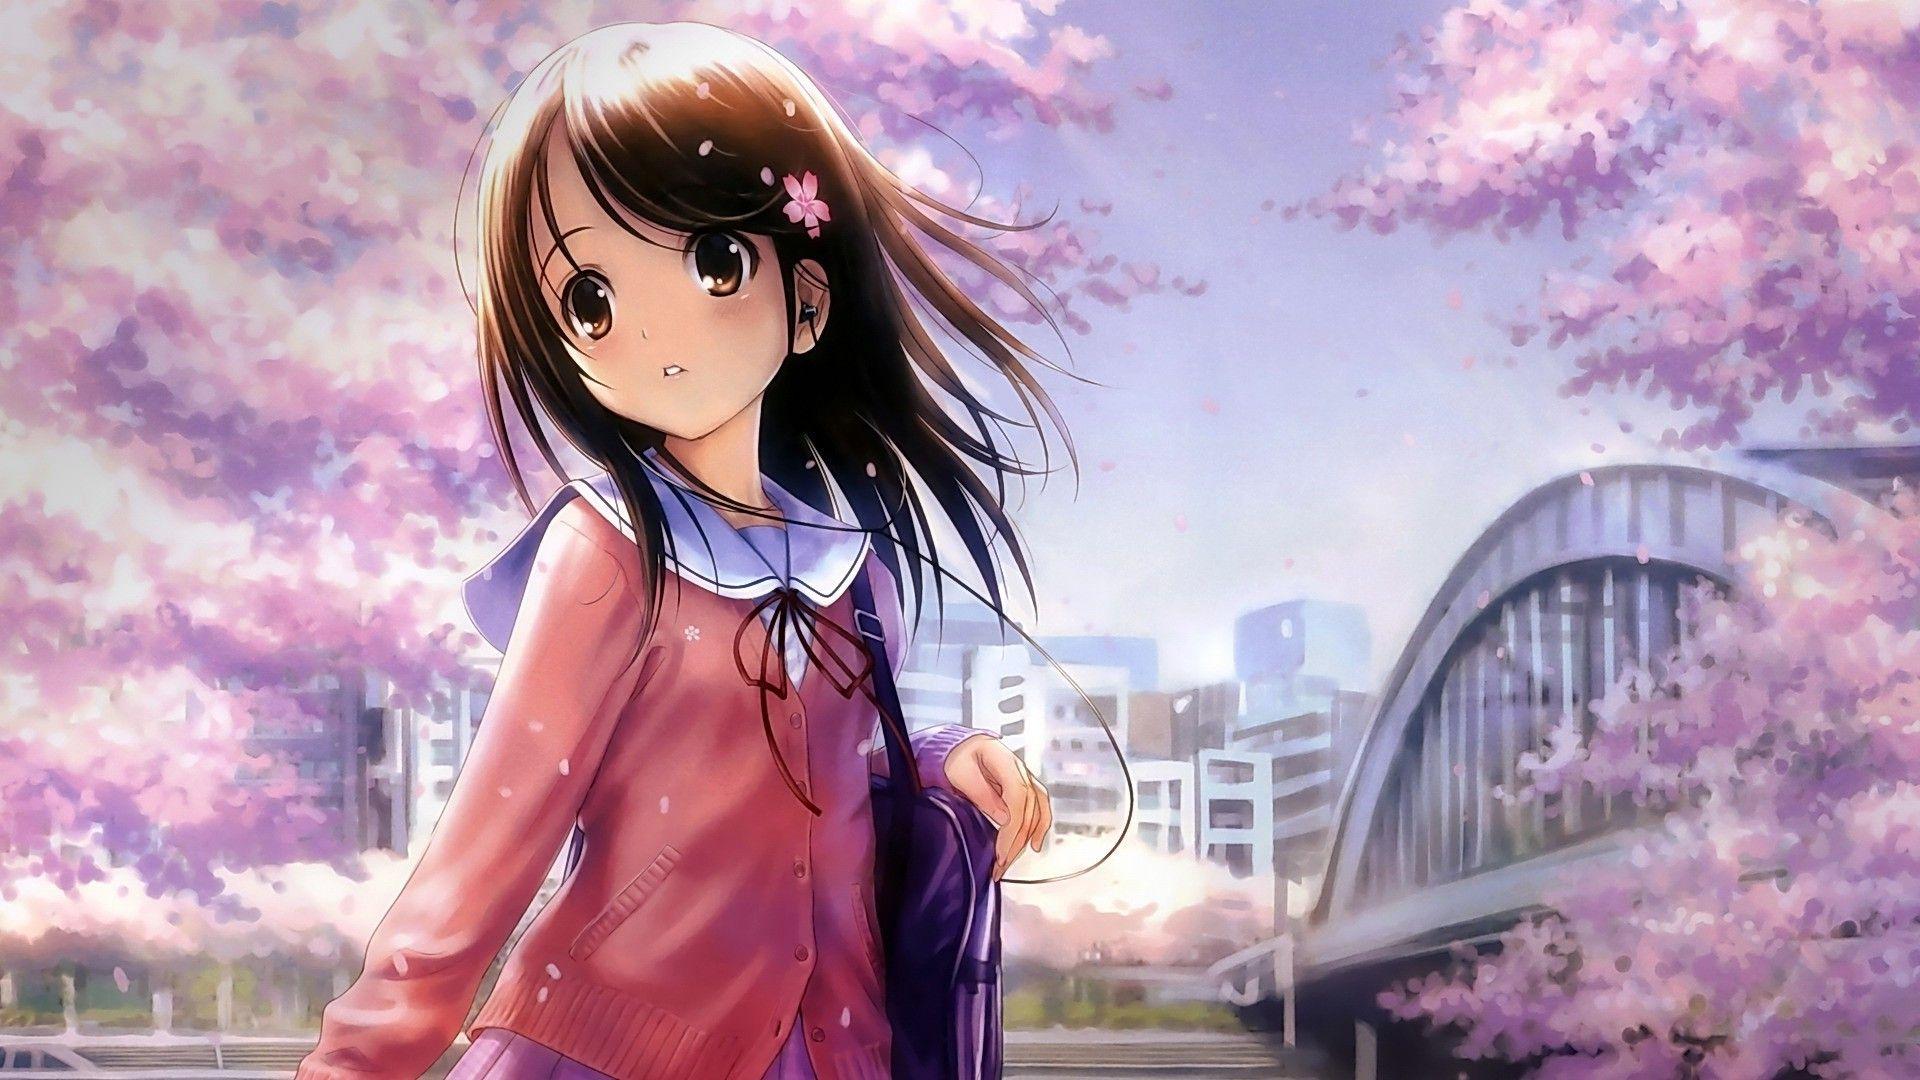 Cute Anime Wallpapers - Top Free Cute Anime Backgrounds ...